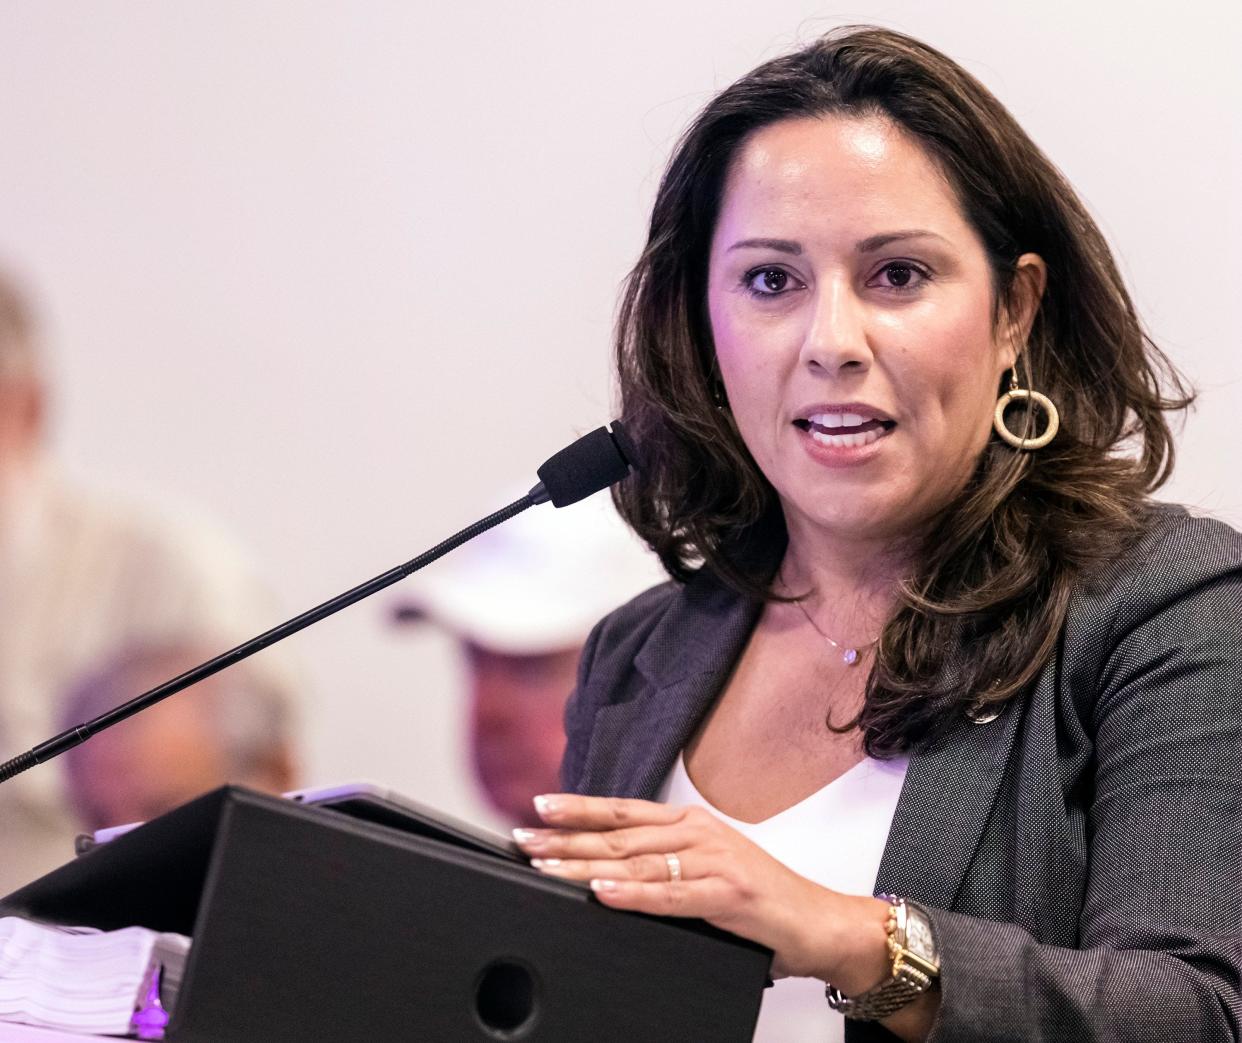 West Palm Beach city commissioner Christina Lambert speaks during the Palm Beach Transportation Planning Agency before the group voted to add State Road 7 back onto a long-range plan Thursday, February 20, 2020 in West Palm Beach. [LANNIS WATERS/palmbeachpost.com]